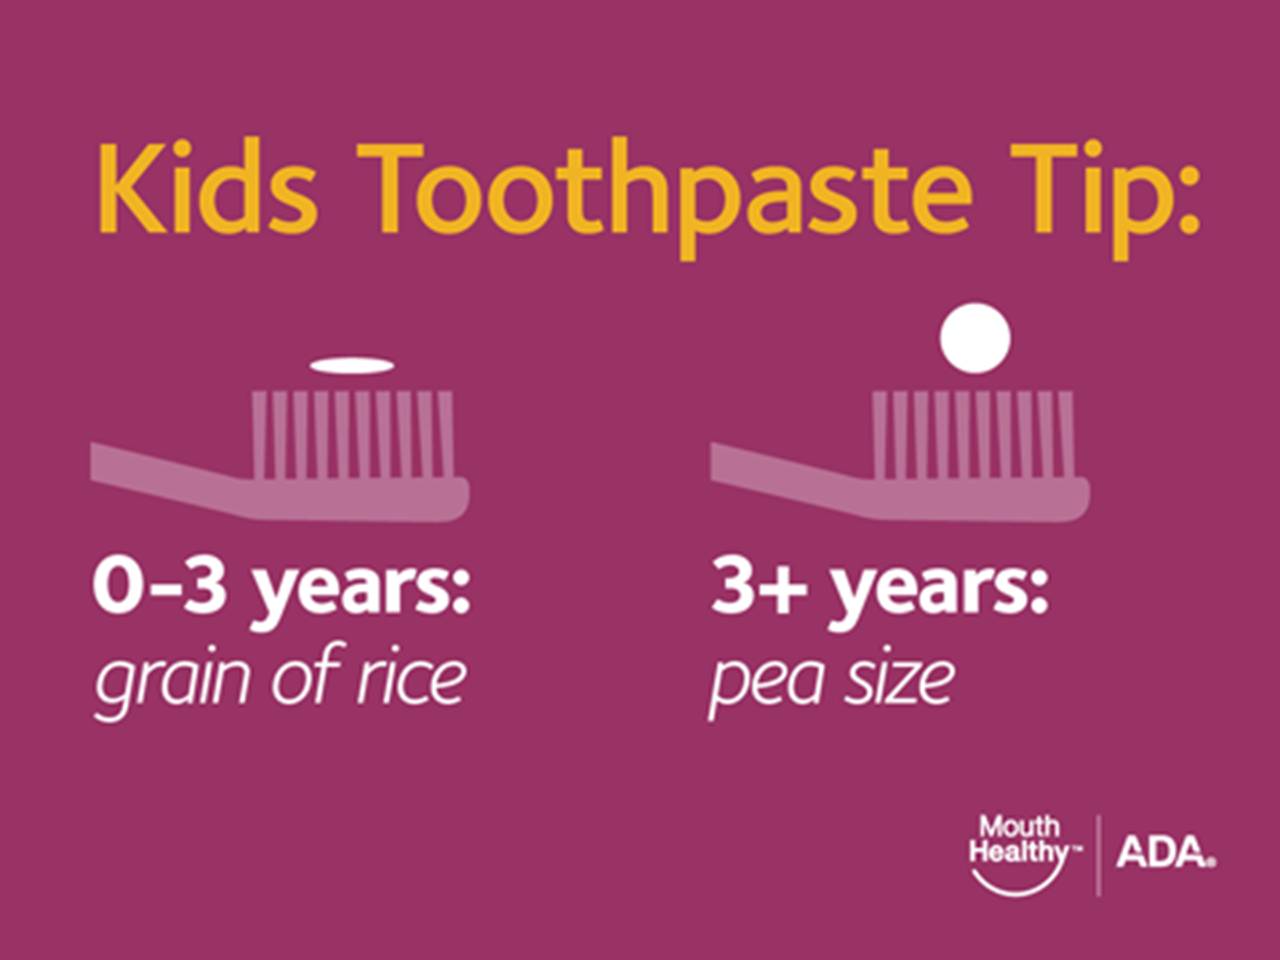 Info graphic depicting the recommended amounts of kid's toothpaste for under 3 years and 3 to 6 years old.